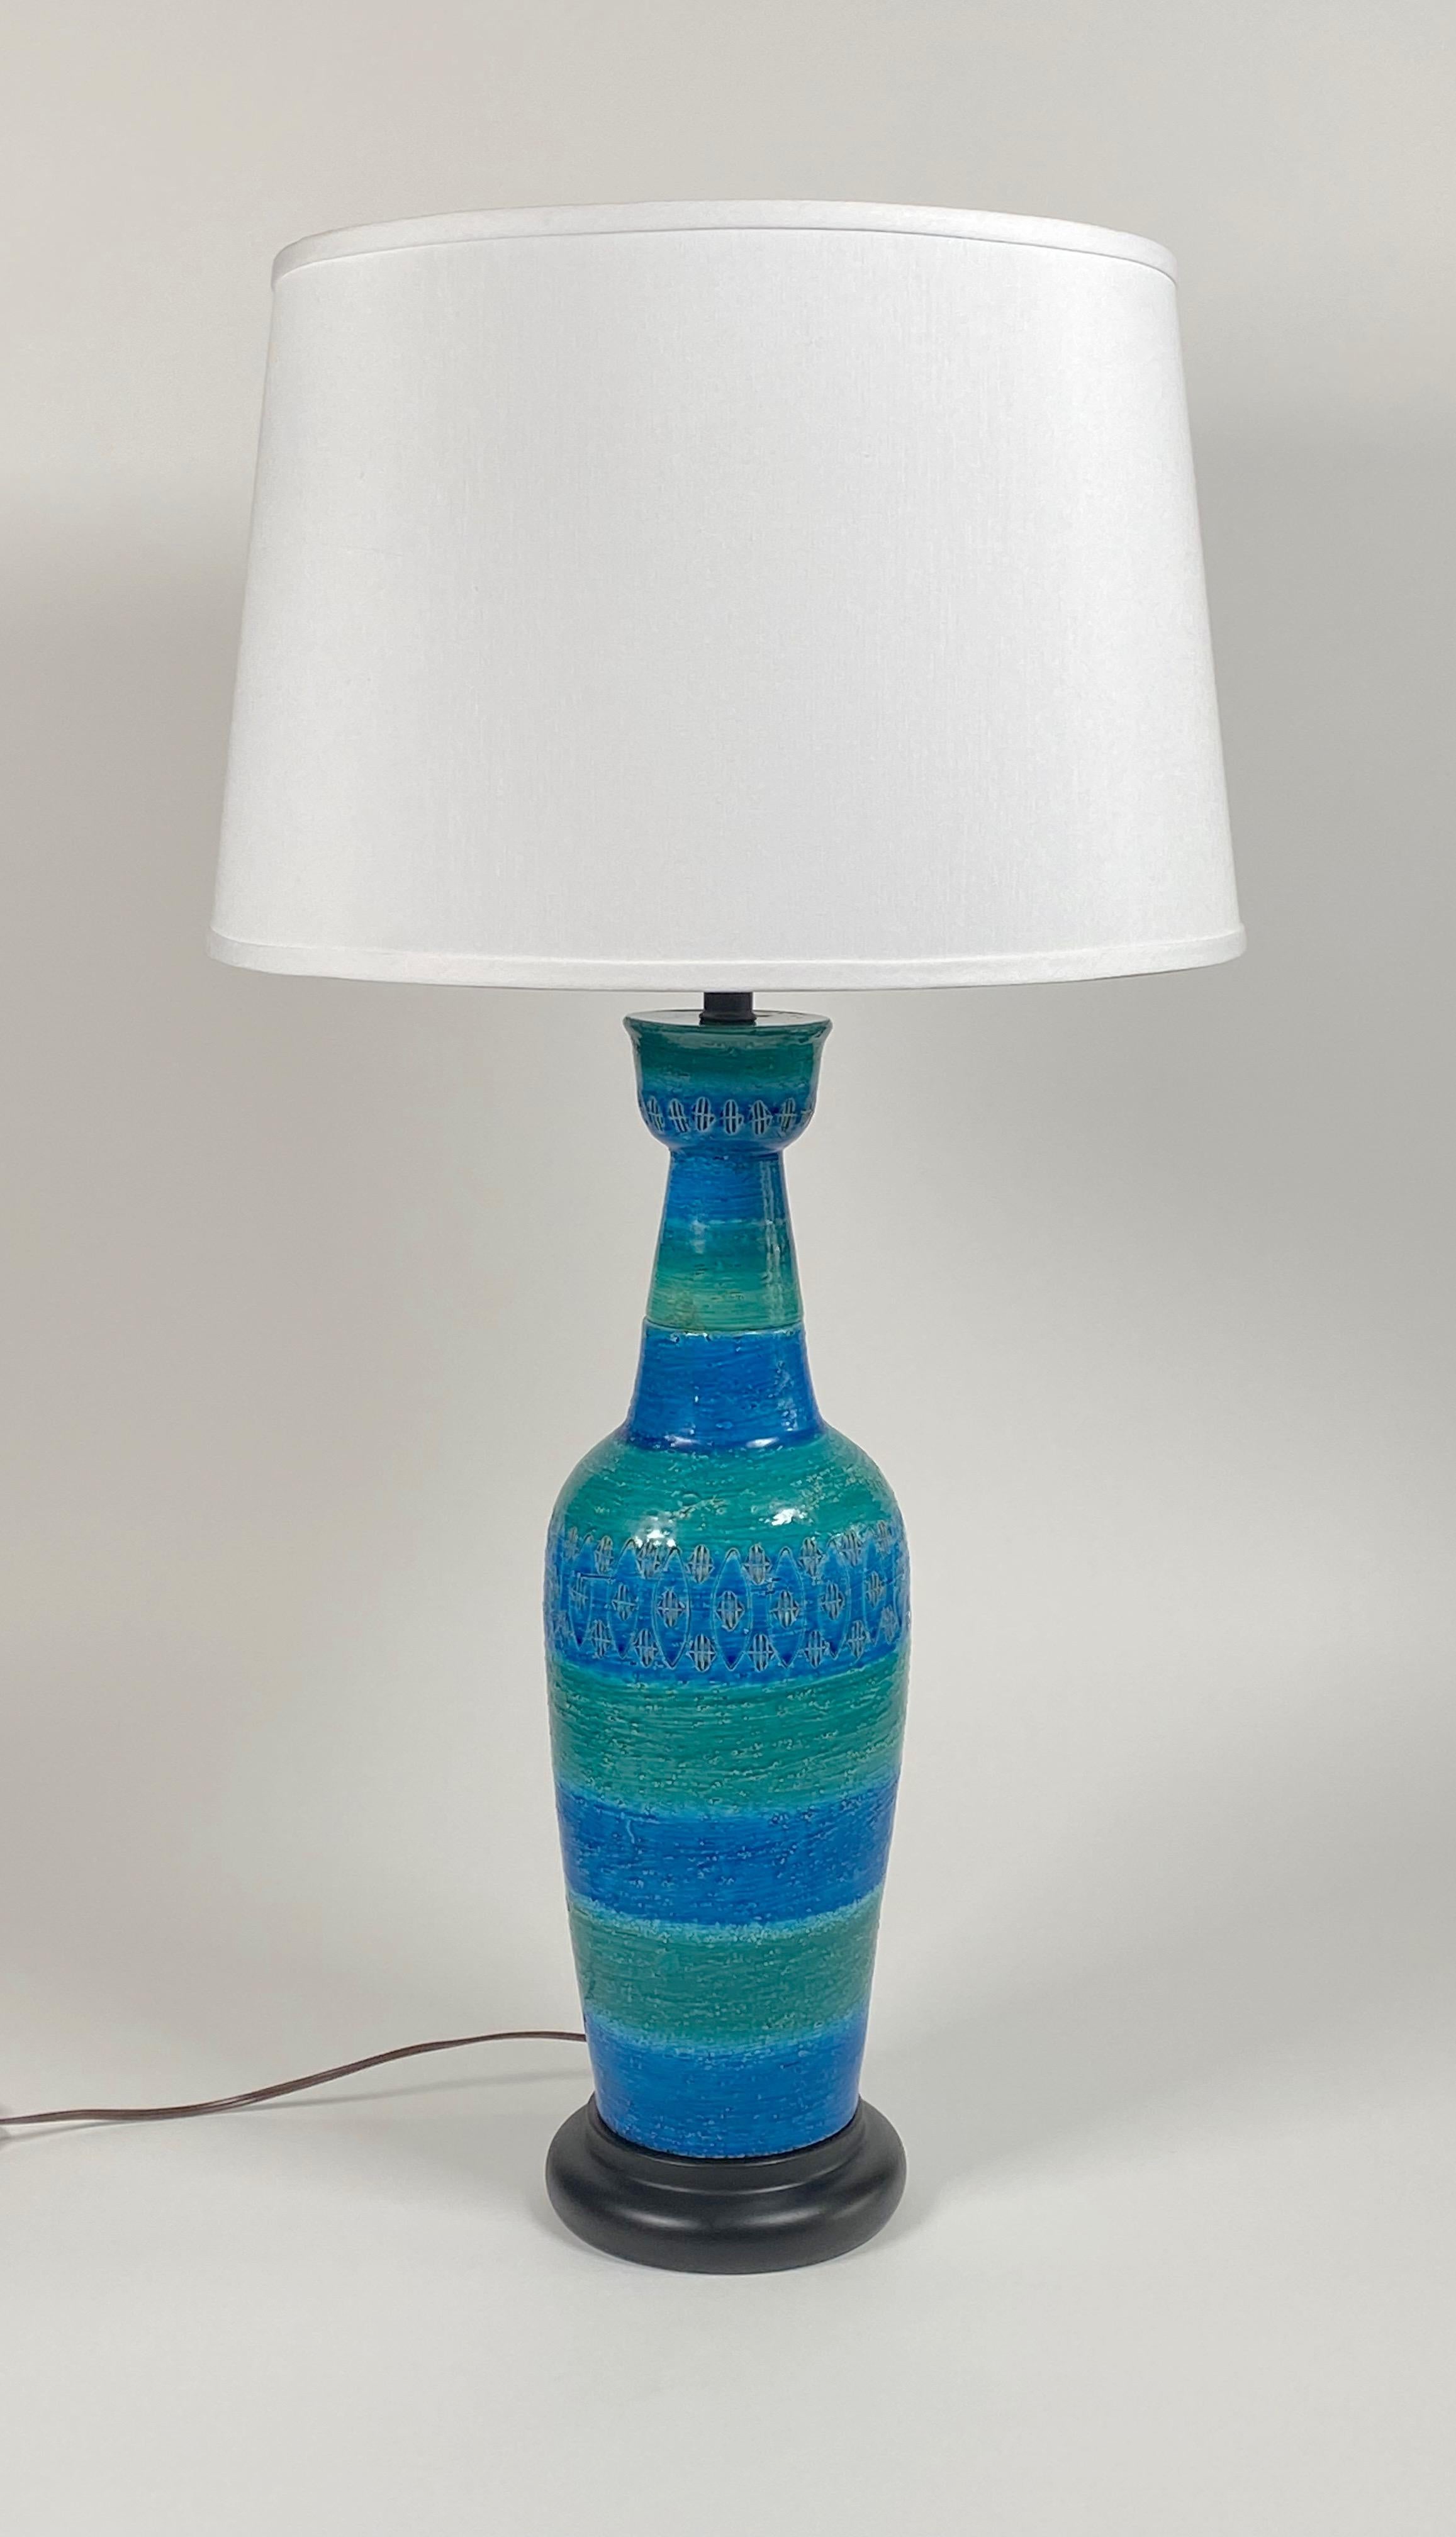 Ceramic table lamp designed by Aldo Londi for Bitossi of Italy. Multi-colored in green and blue with impressed patterns around the body of the lamp, resting on a black metal base, rewired and the metal components resprayed. The lamp height of 24' is